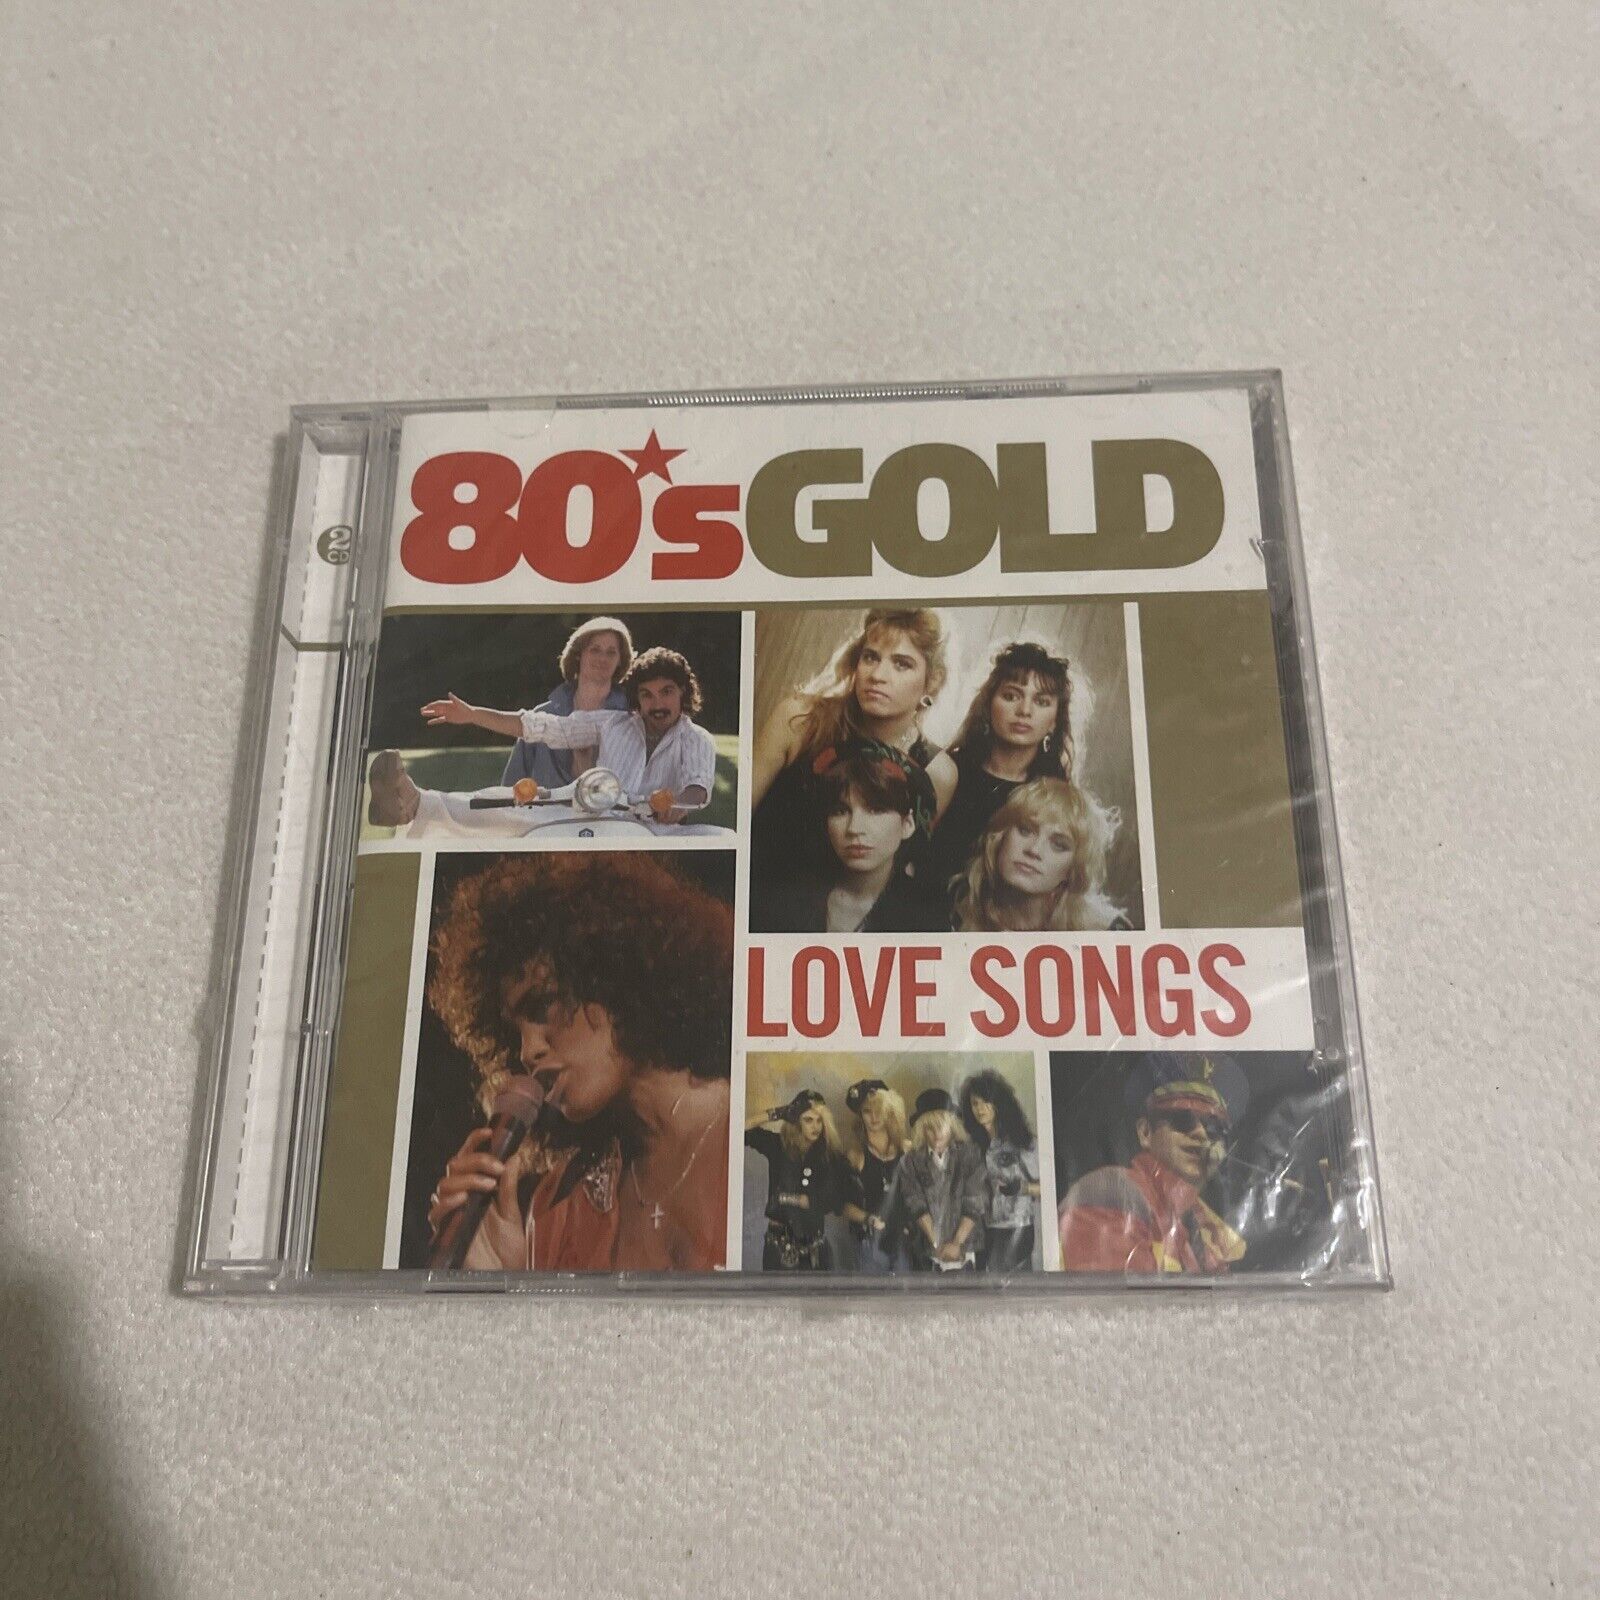 TOTO & VARIOUS 80'S ARTISTS - 80's Gold Love Songs 2- Set! - 2 CD - BRAND NEW